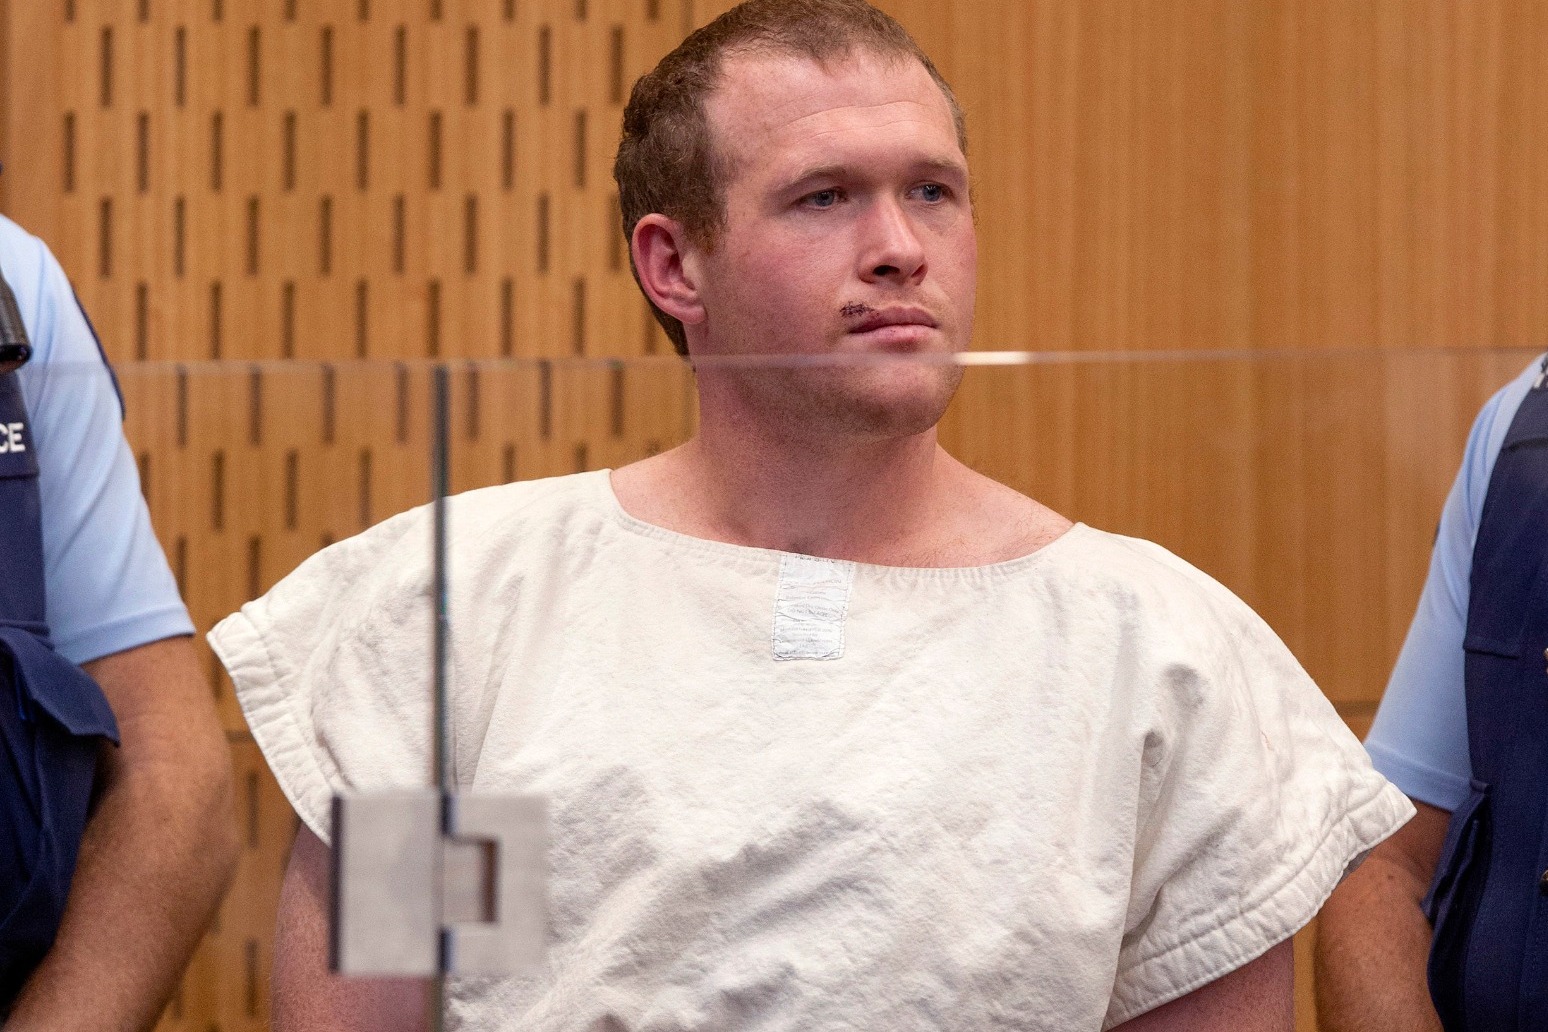 New Zealand Mosque shooter changes plea to guilty 